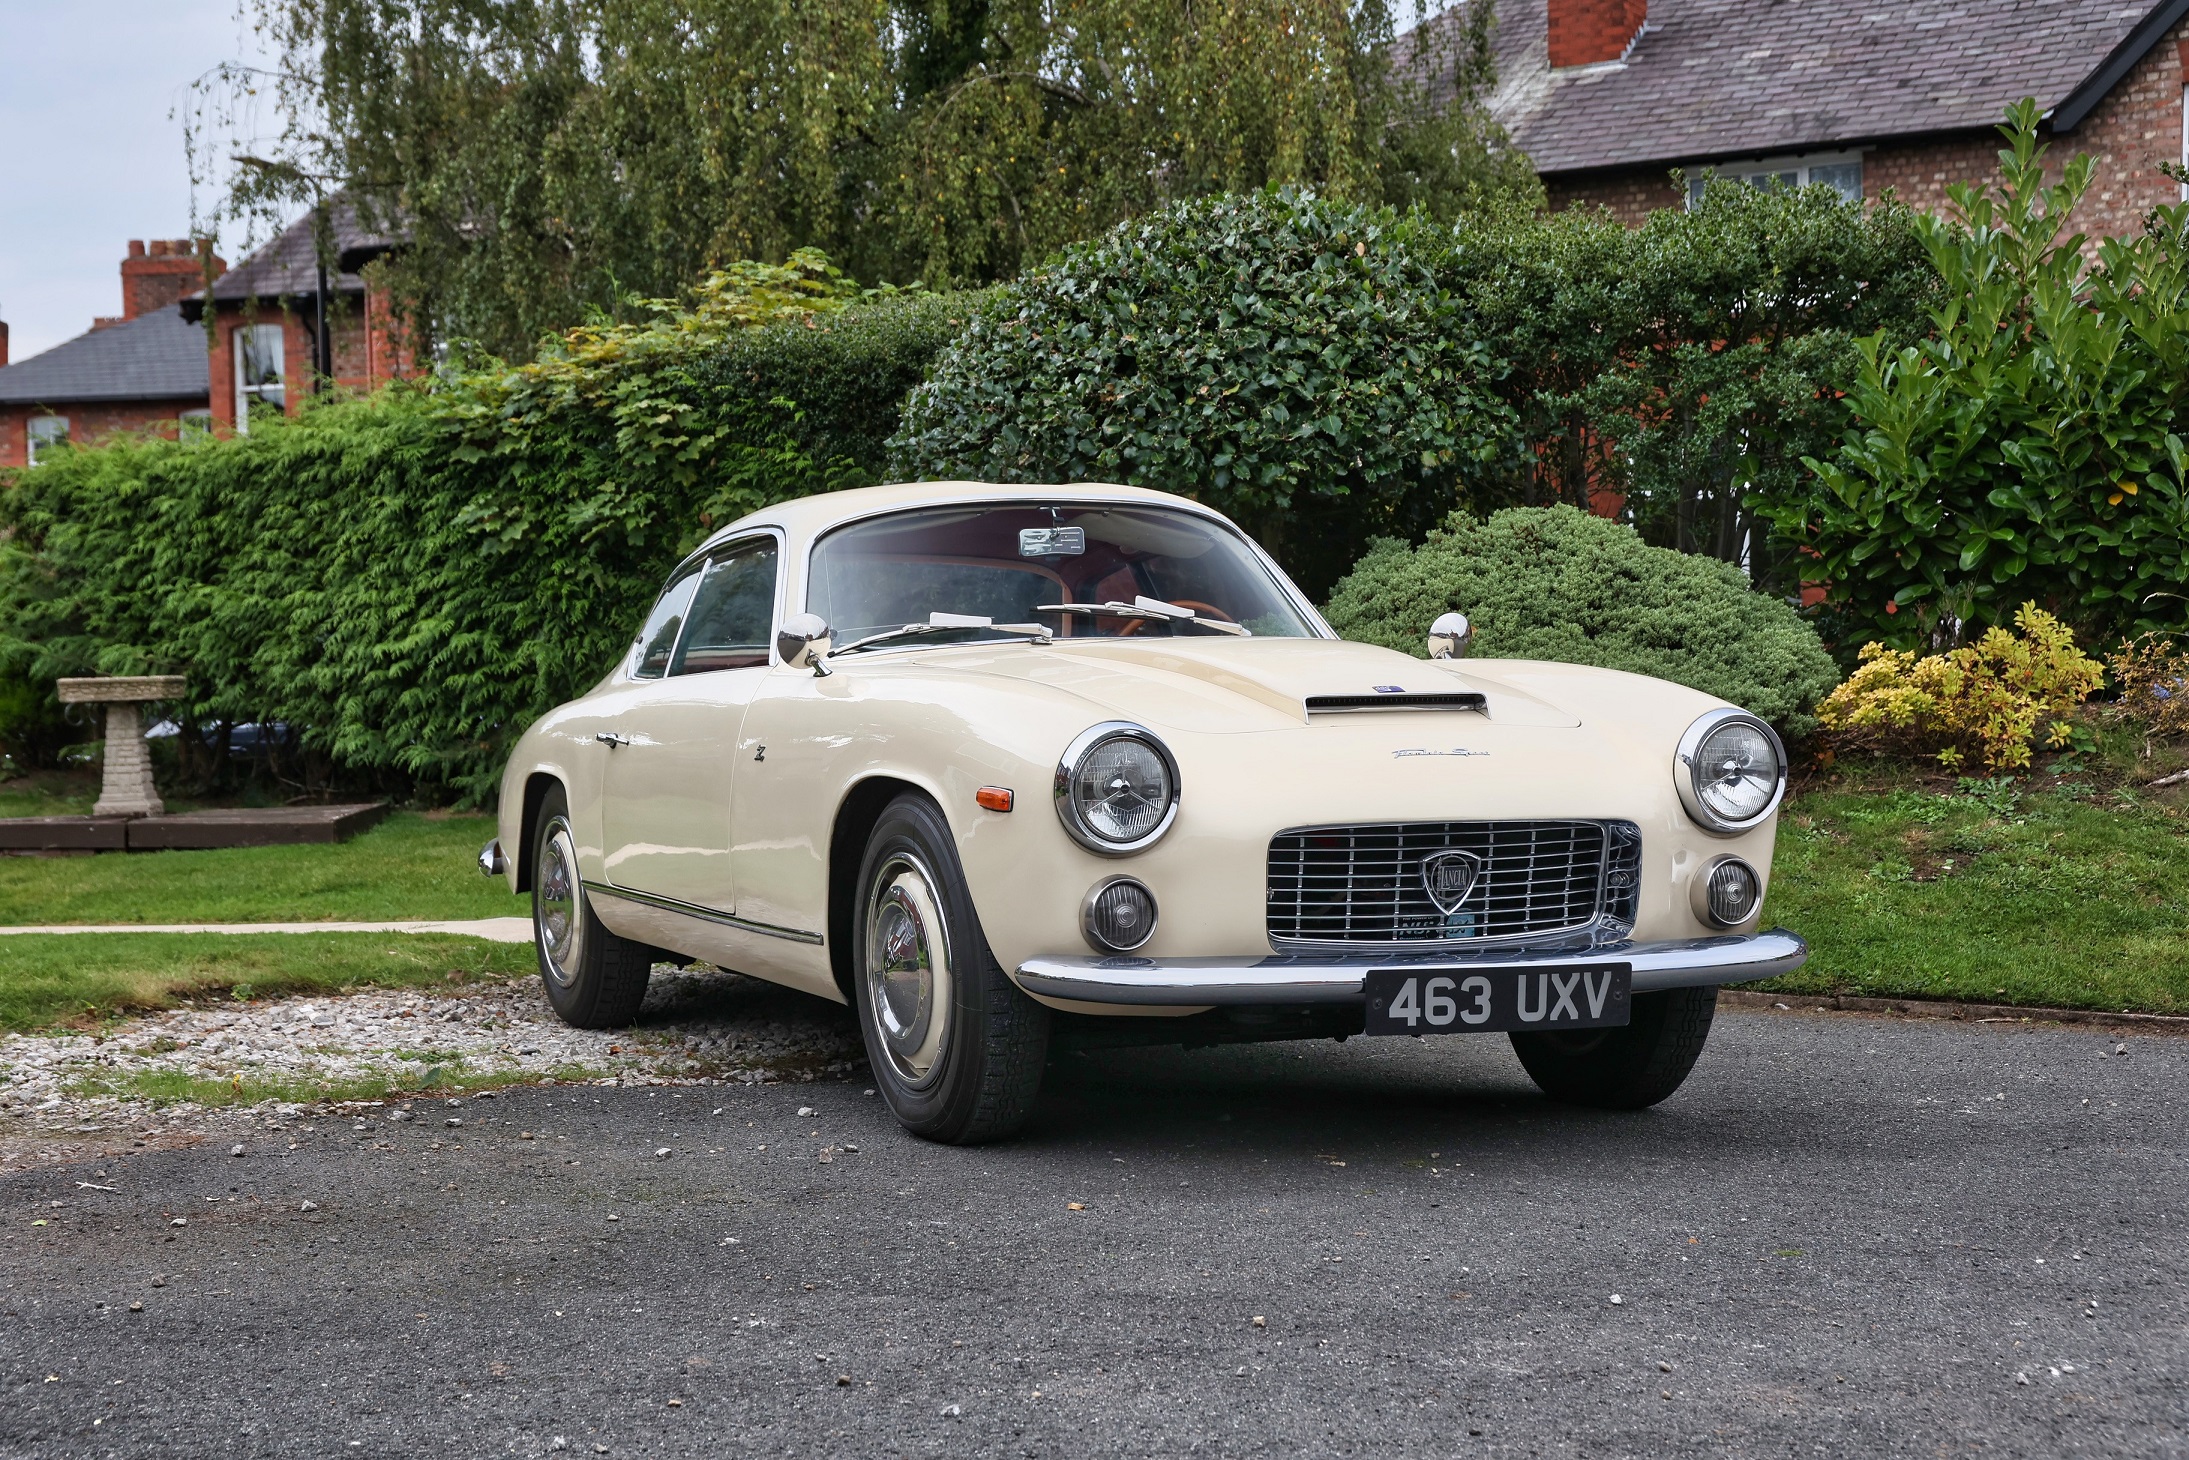 1962 LANCIA FLAMINIA SPORT 3C 2.5-LITRE COUPÉ Registration Number: 463 UXV Chassis Numb - Image 2 of 21